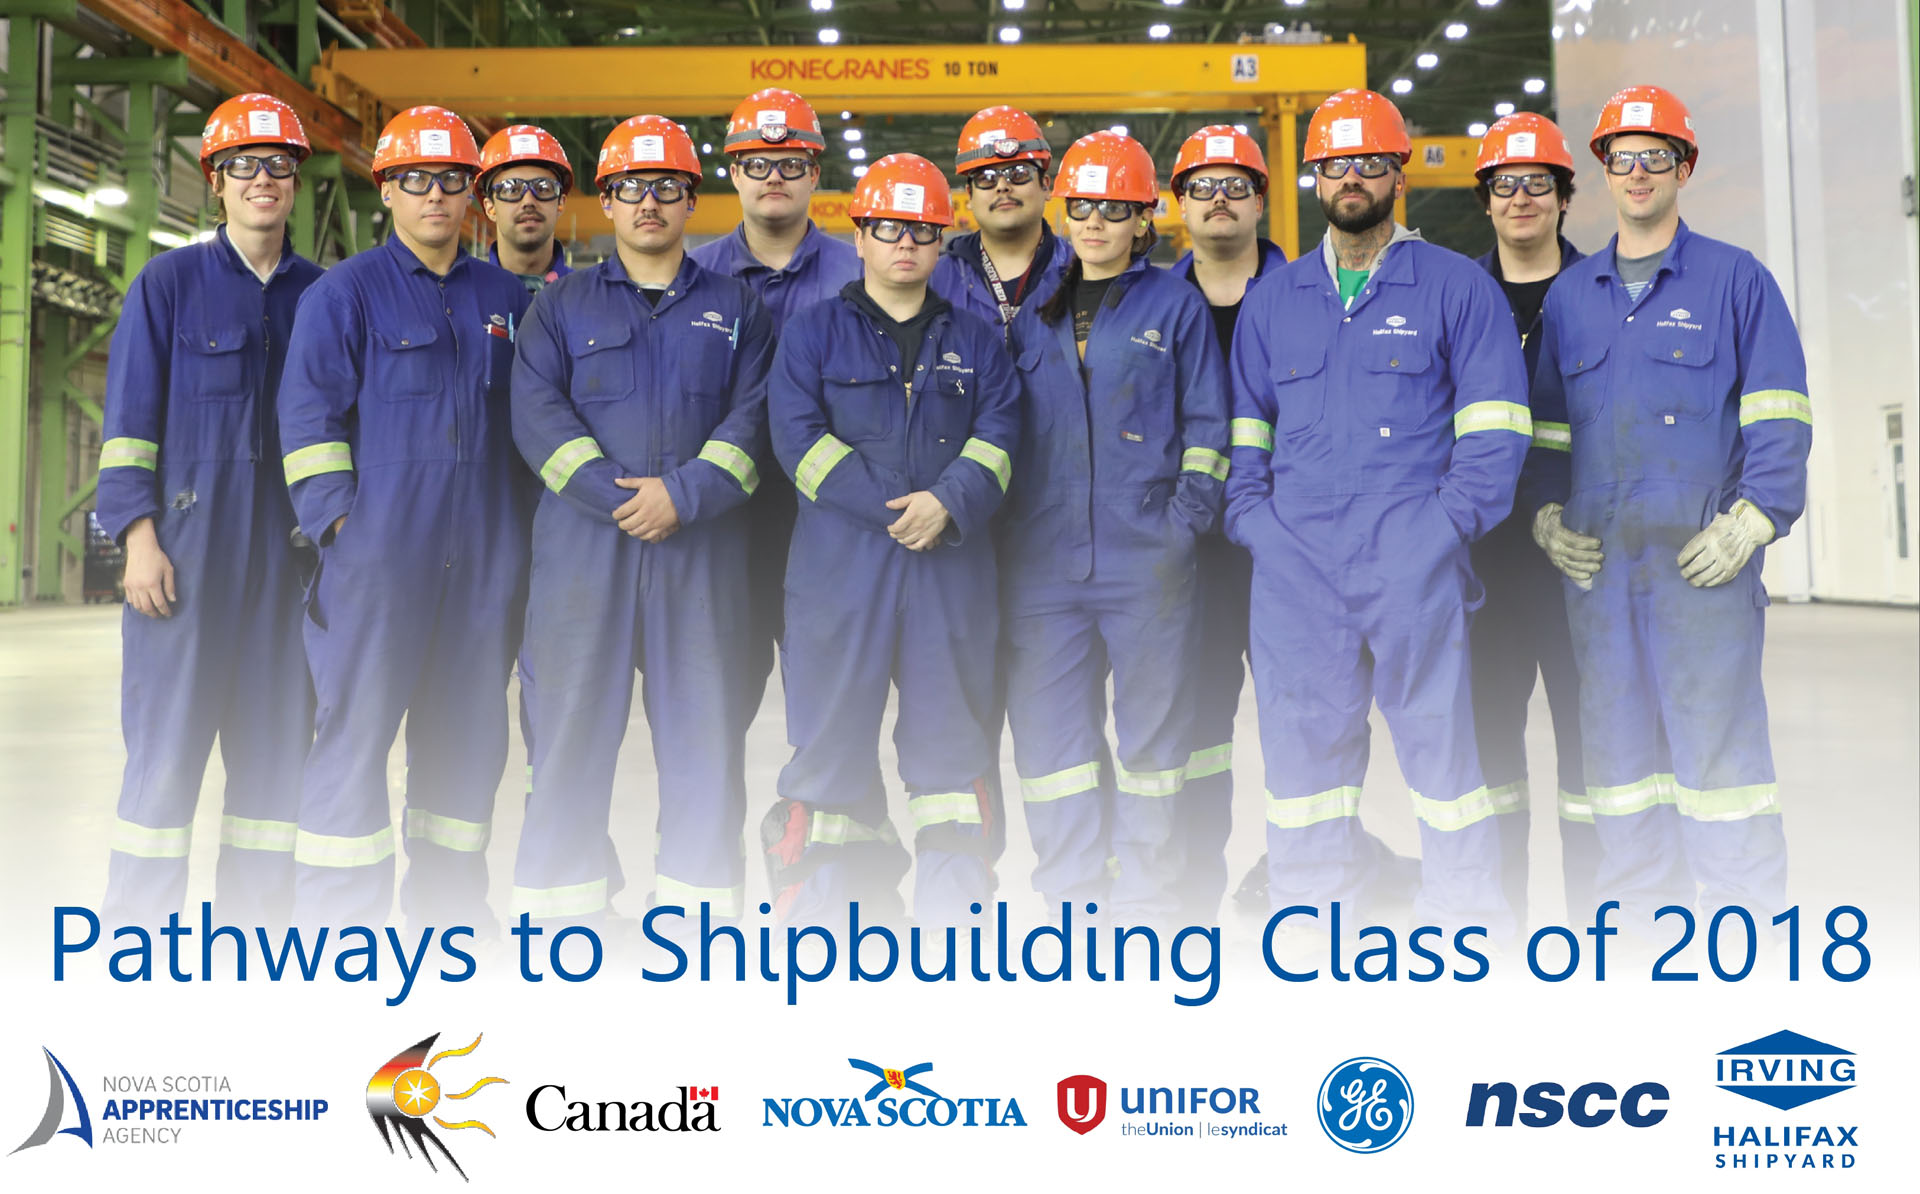 http://shipsforcanada.ca/images/story-images/Pathways-class-pic-with-logos-text-banner.jpg